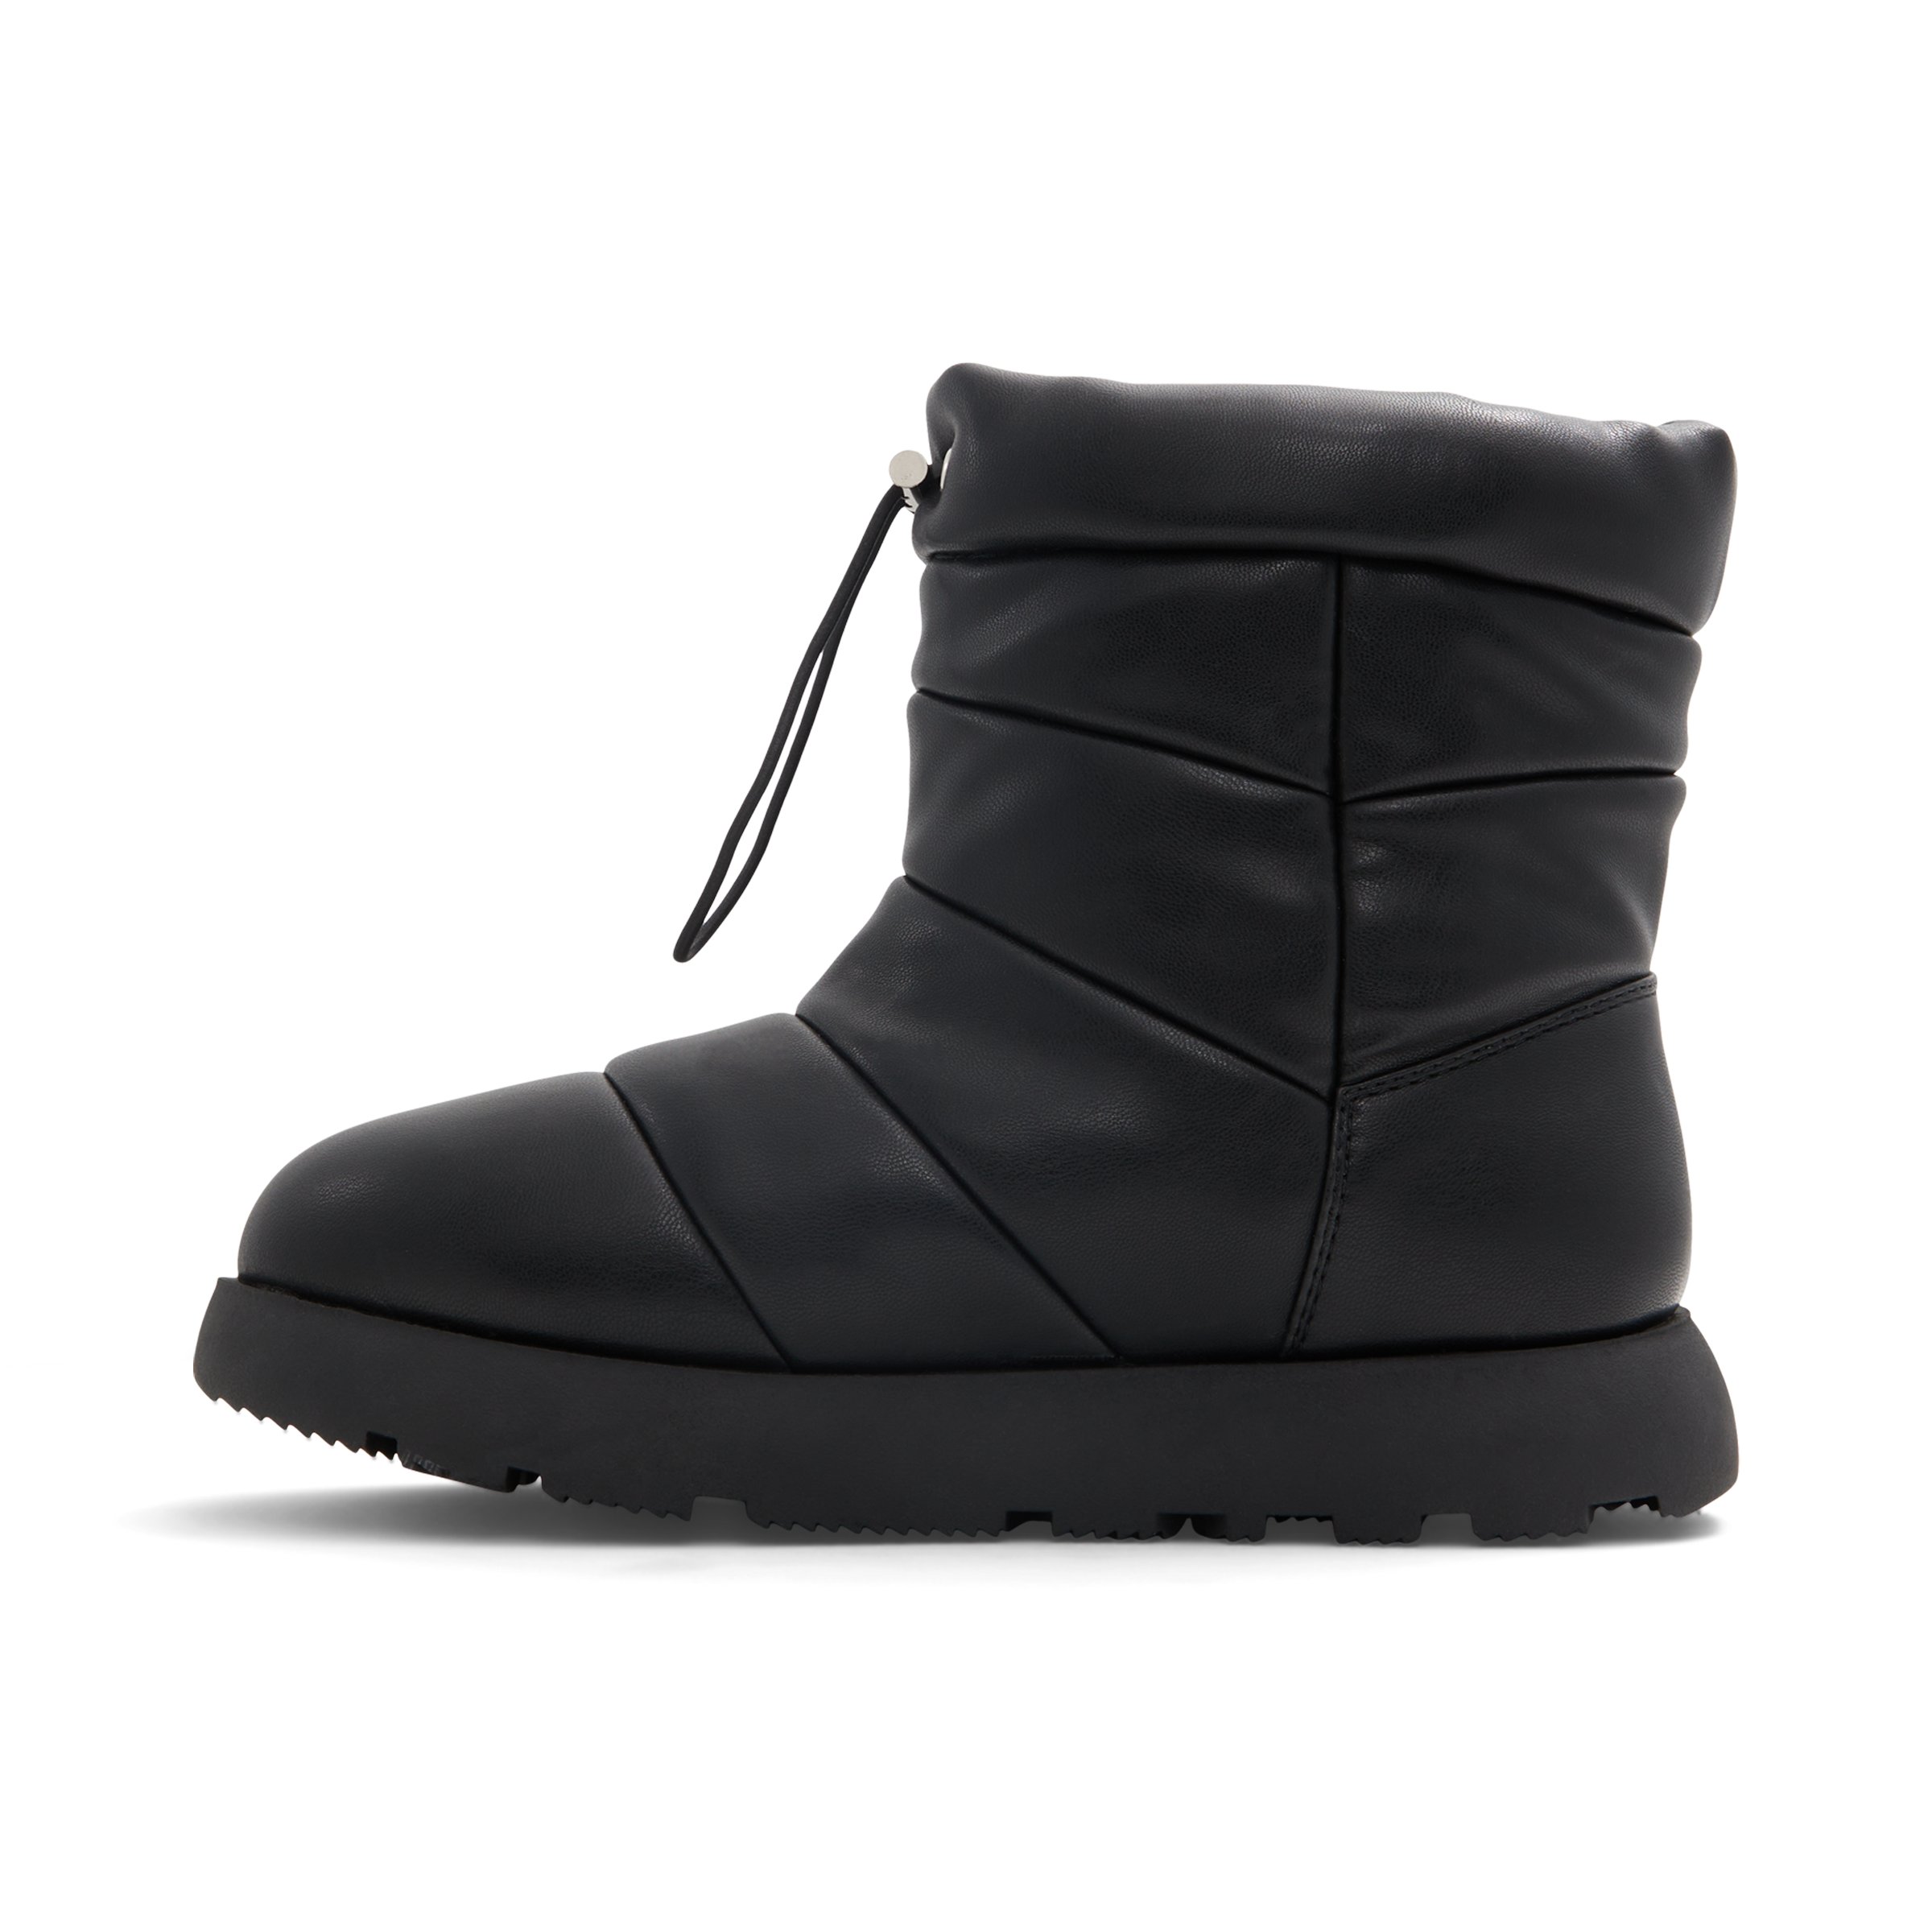 Whiteout Black Women's Mid-calf Boots | Call It Spring Canada